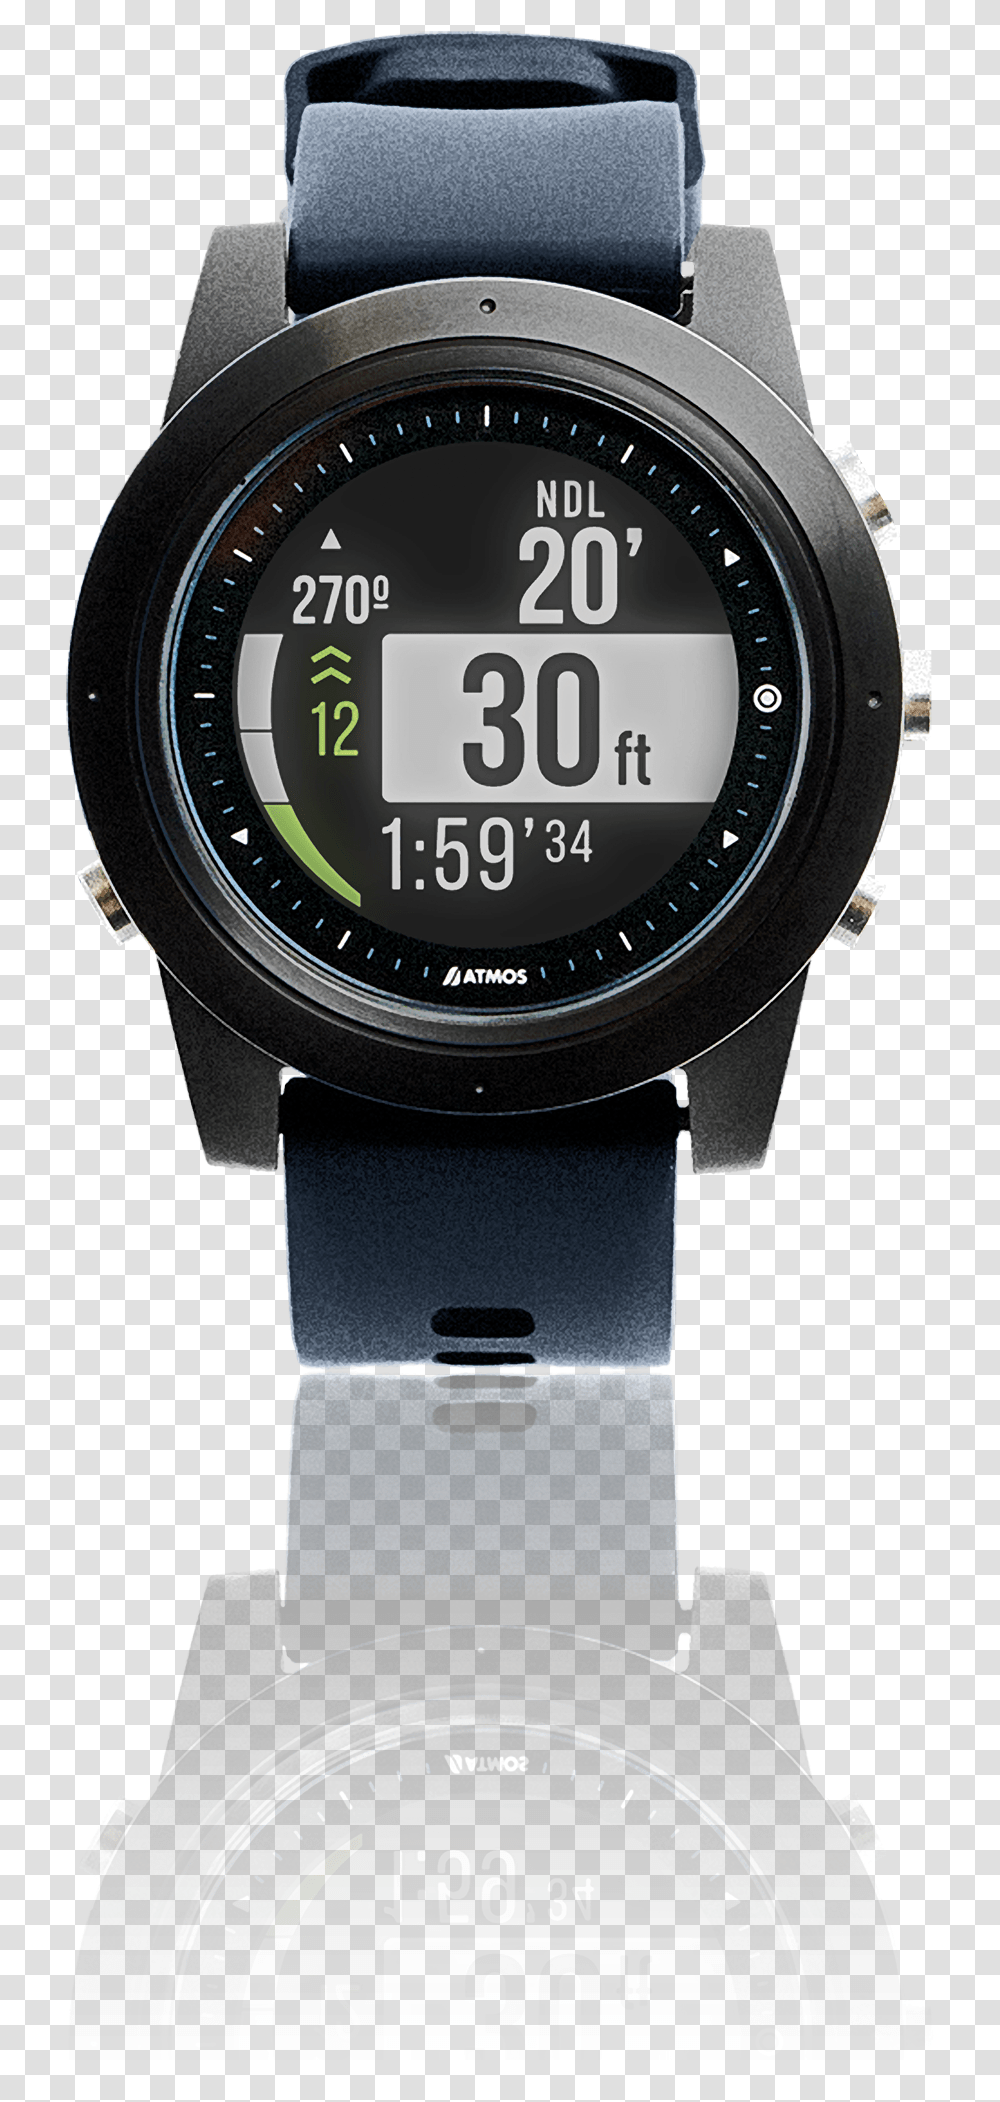 Atmos Diving Watch Atmos Mission One Dive Computer, Wristwatch, Digital Watch Transparent Png